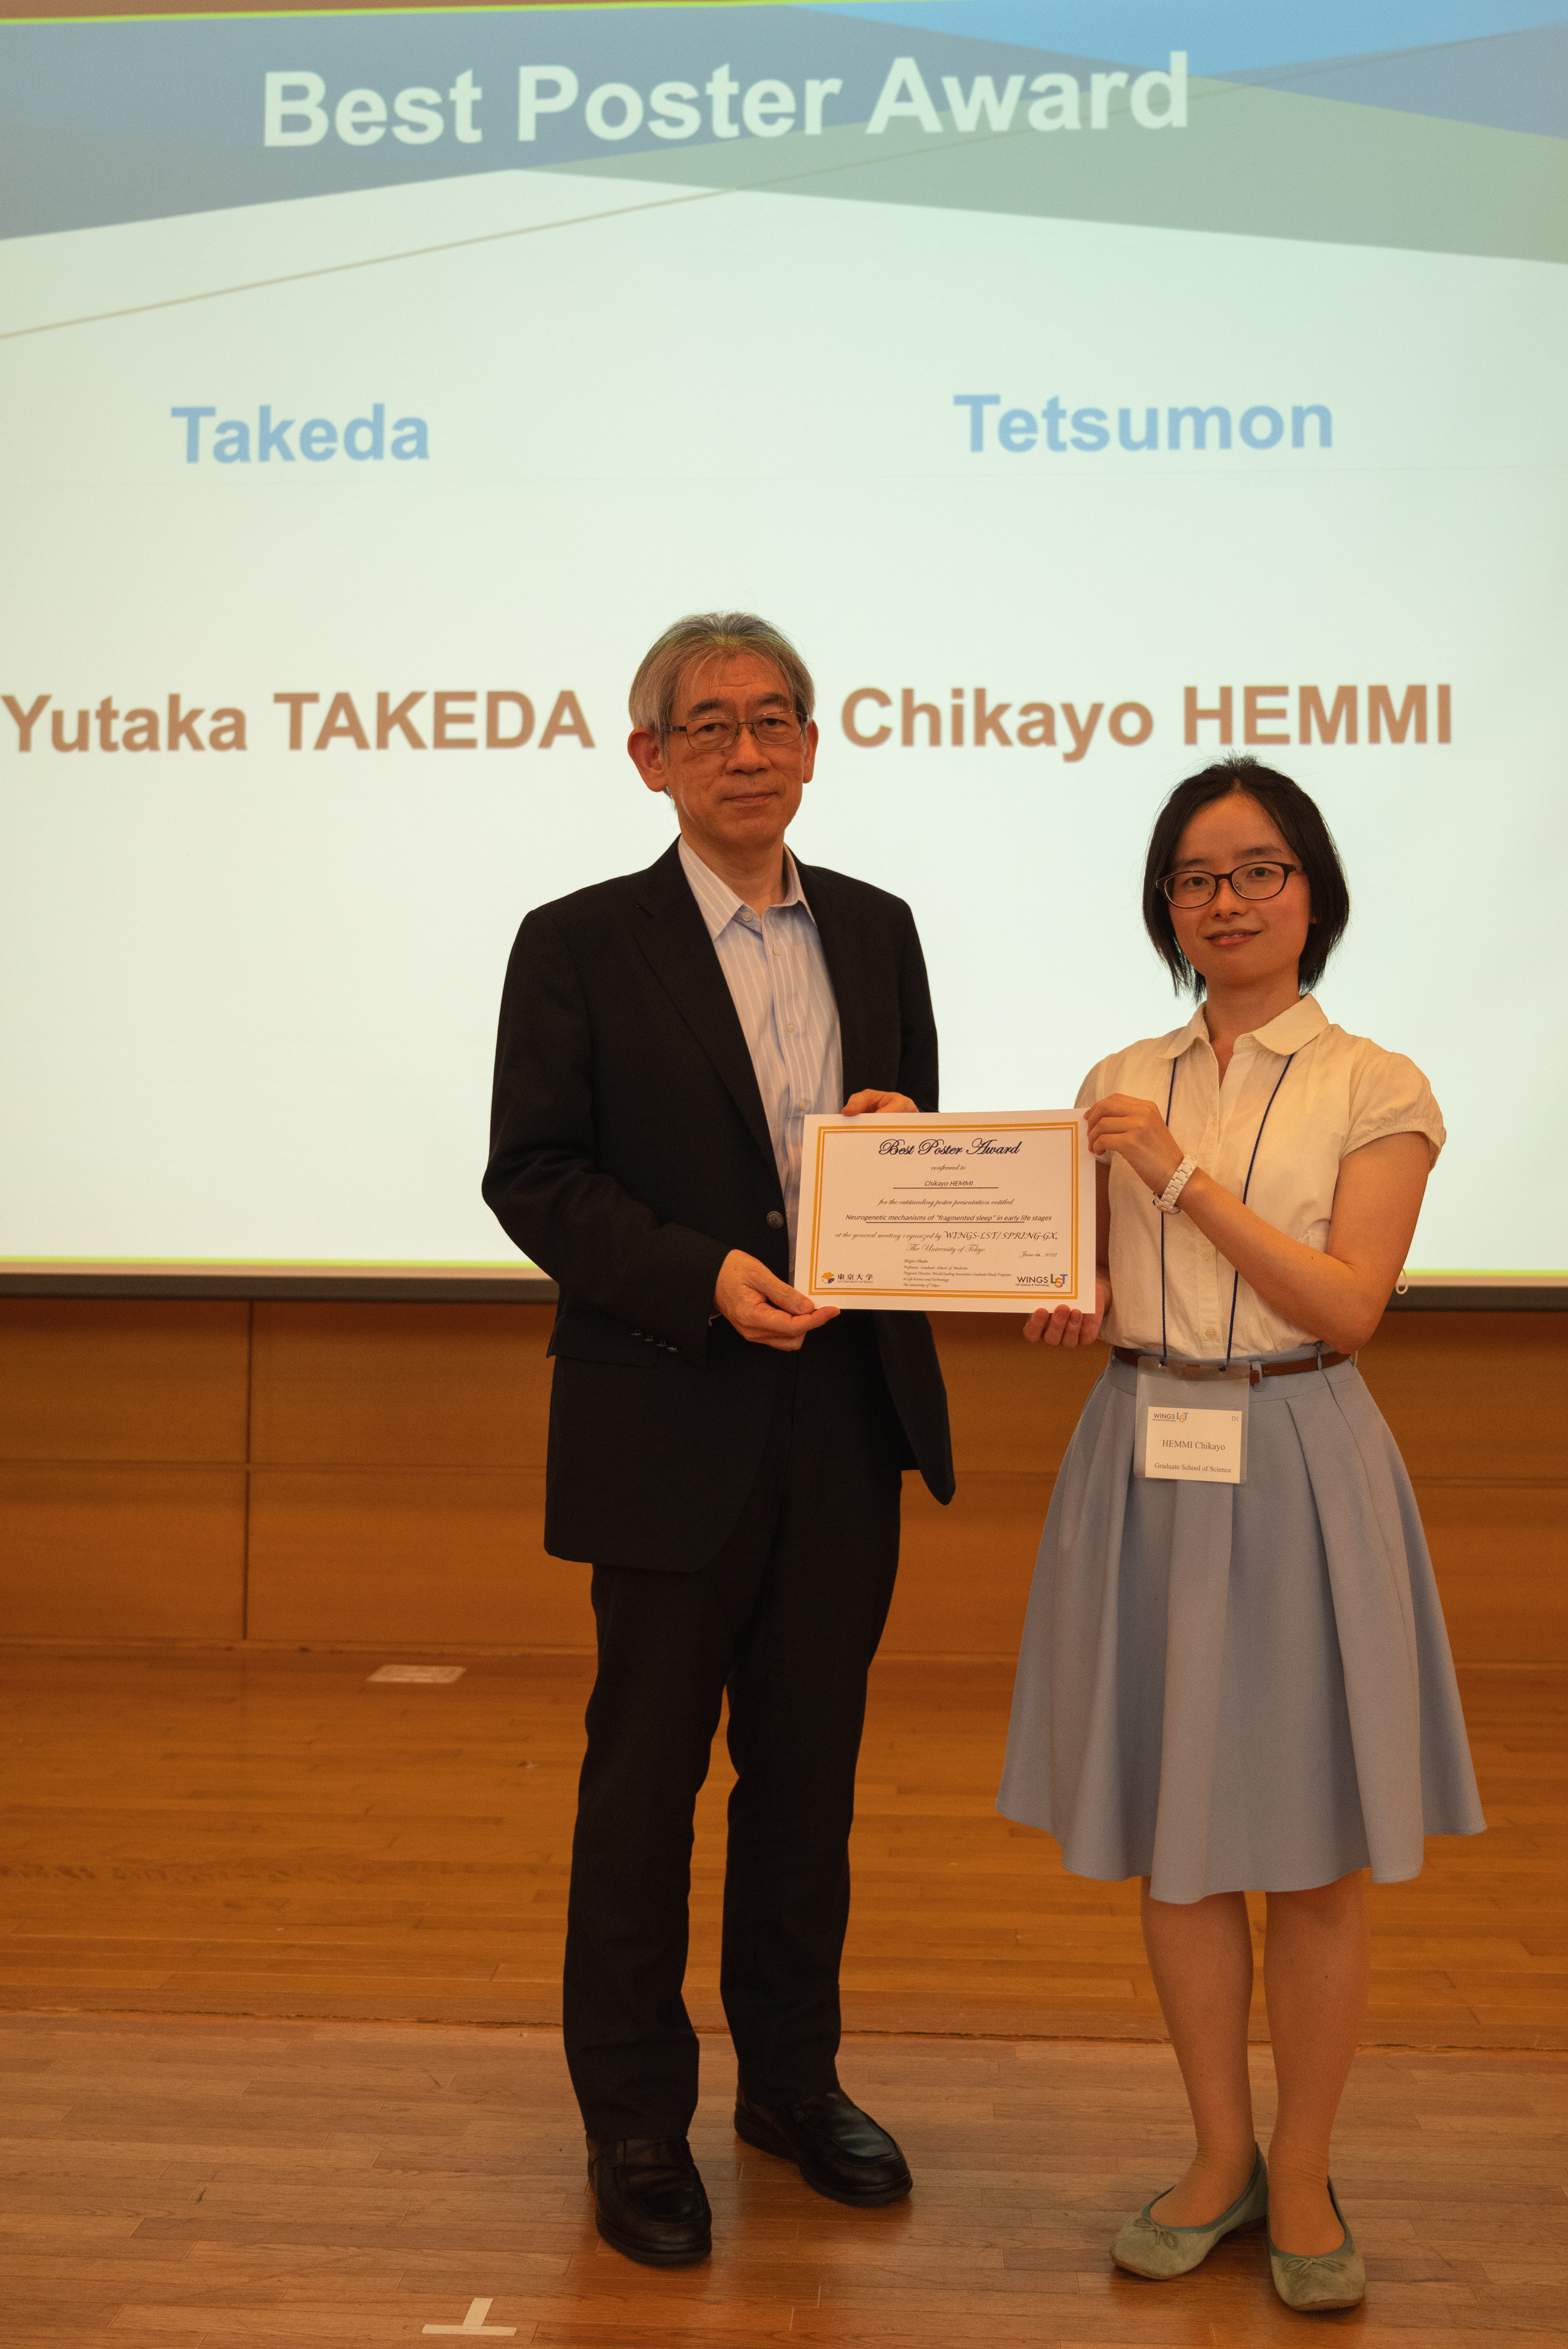 Ceremony, Prof.Okabe(L) and Ms.Henmi(R)